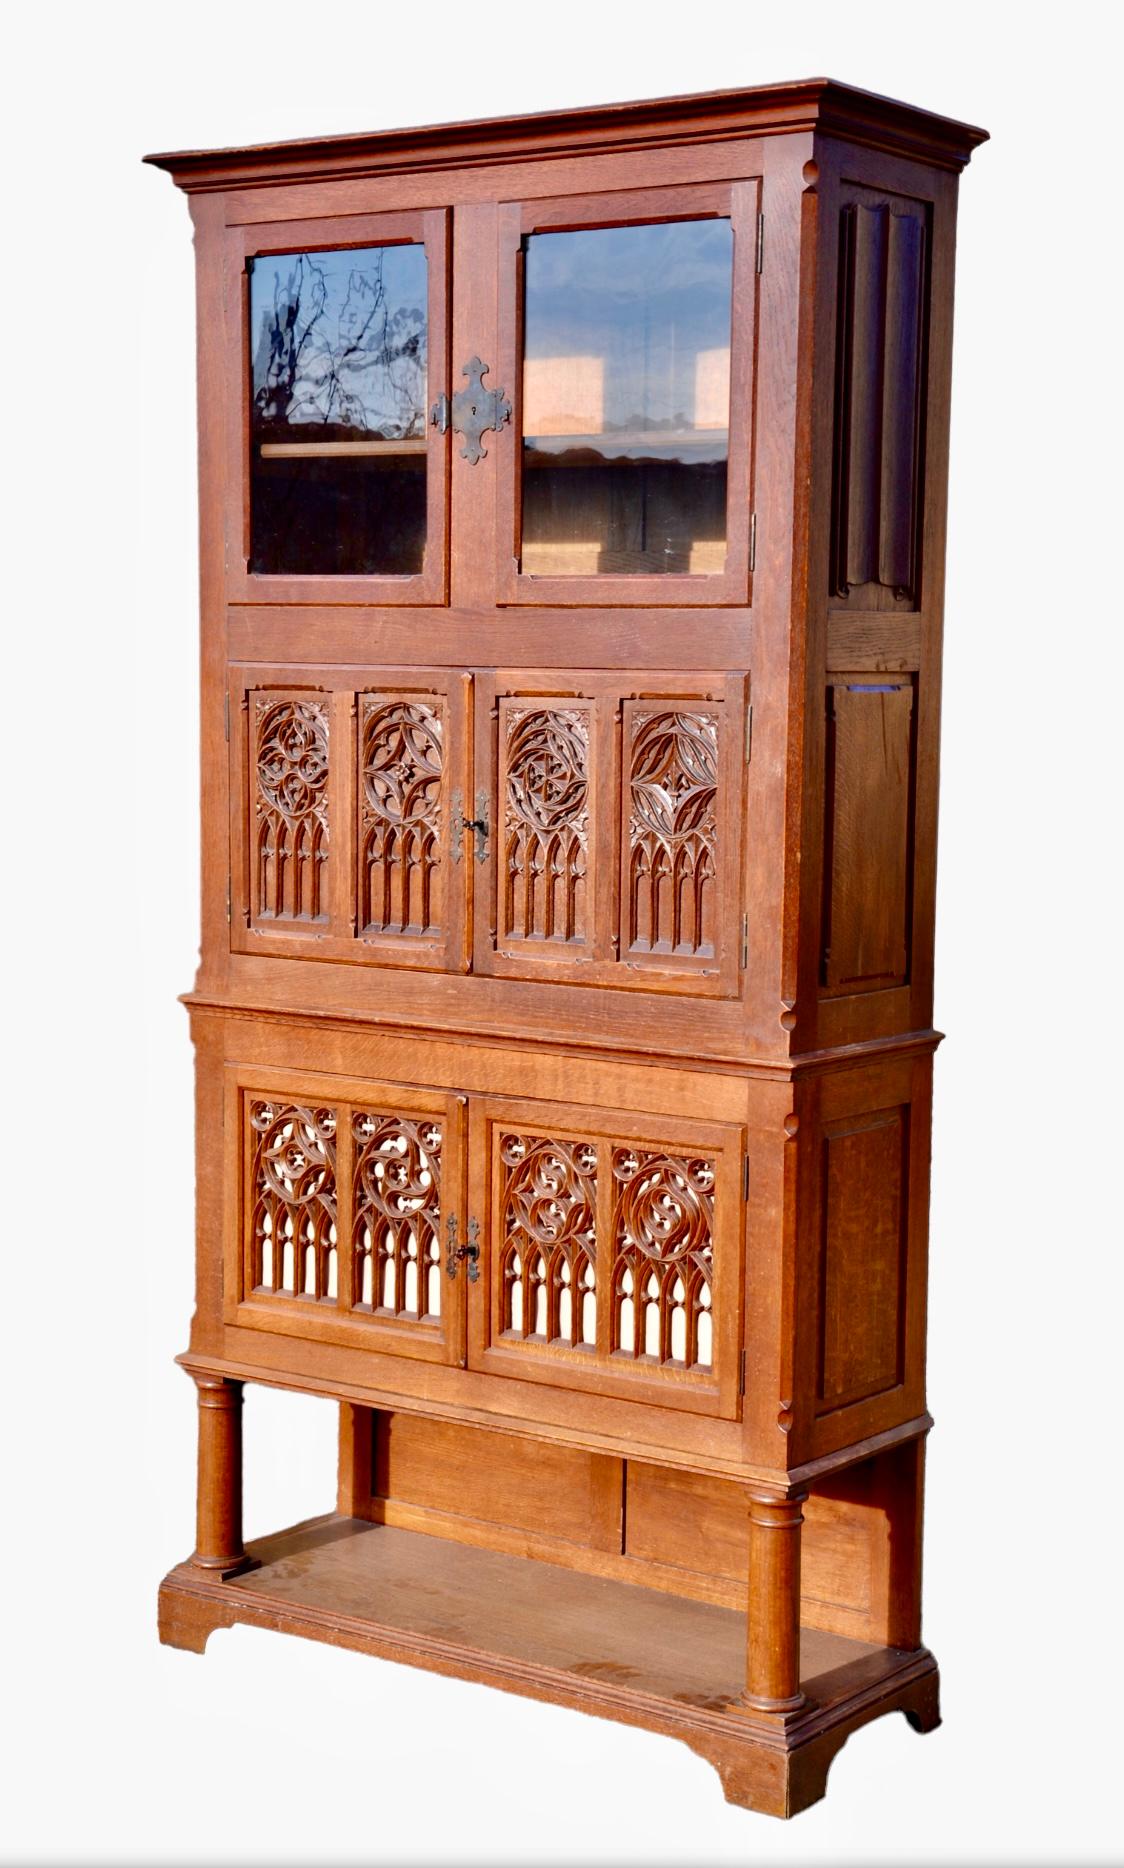 Carved oak Cabinet in Gothic style dating from the 19th century offering a certain amount of storage space. This piece of furniture has a display area at the top, then 2 cupboards with shelves in the center and finally, a niche at the bottom. This